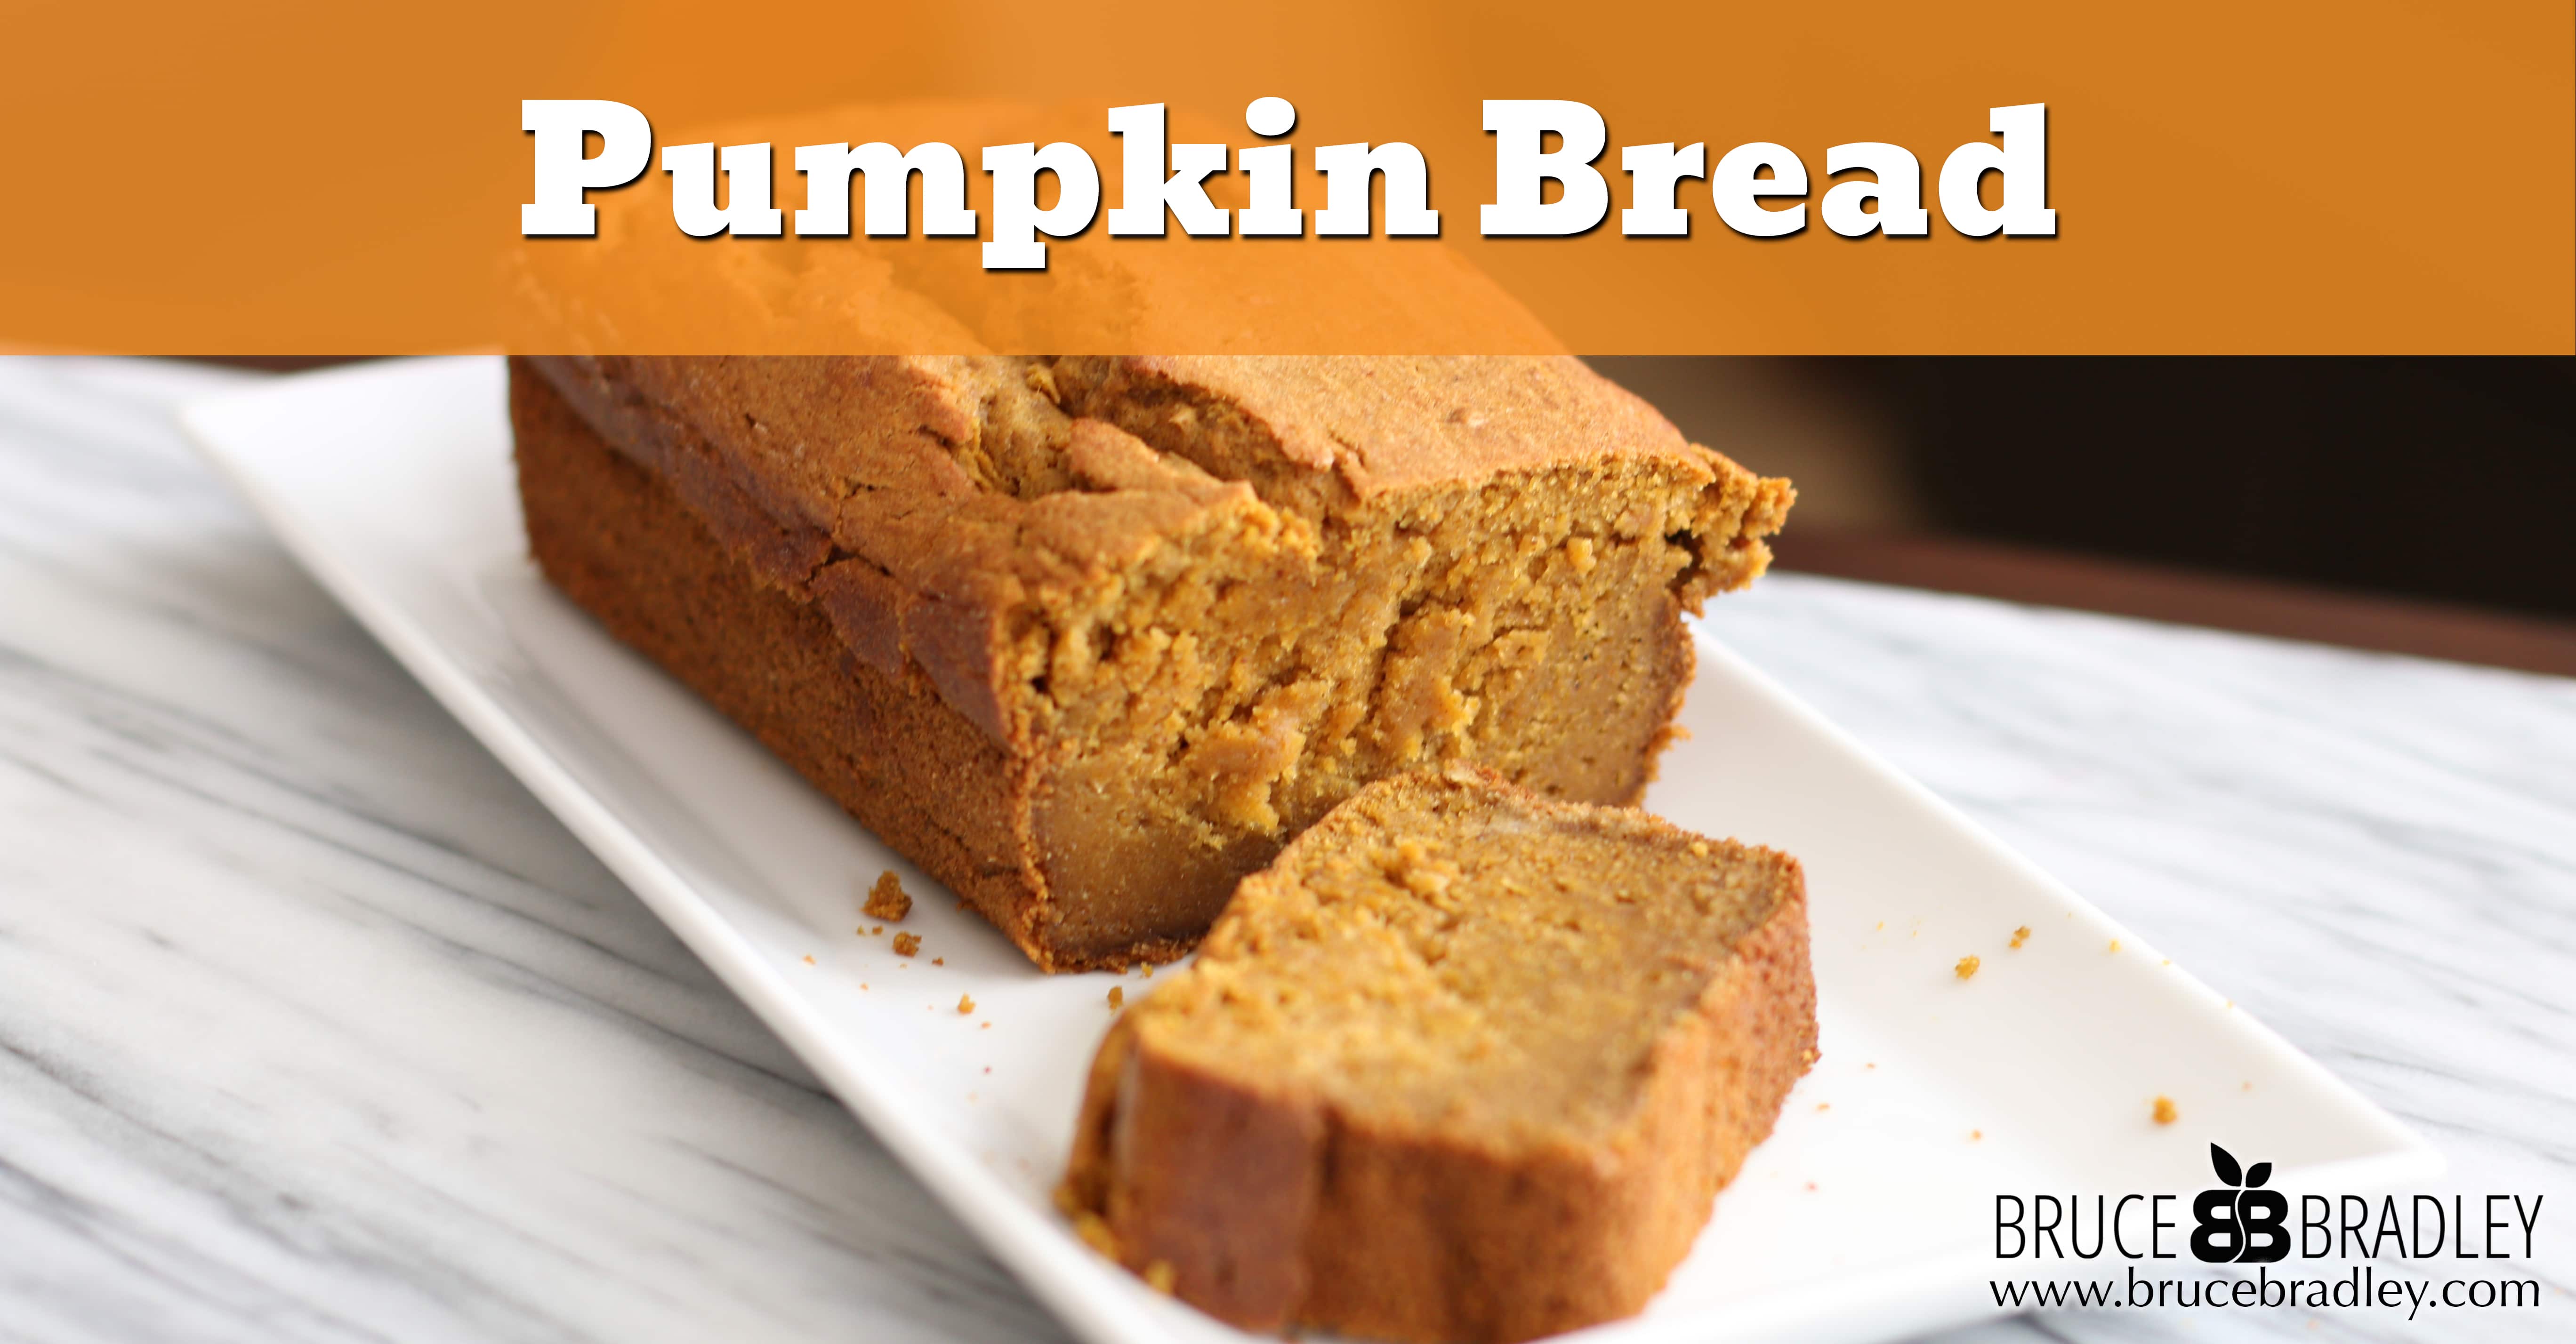 Finally, A Delicious Pumpkin Bread That'S Not Overflowing With Sugar And Is Made With Real Ingredients Like Whole Wheat Pastry Flour, Maple Syrup, And Of Course, Pumpkin!